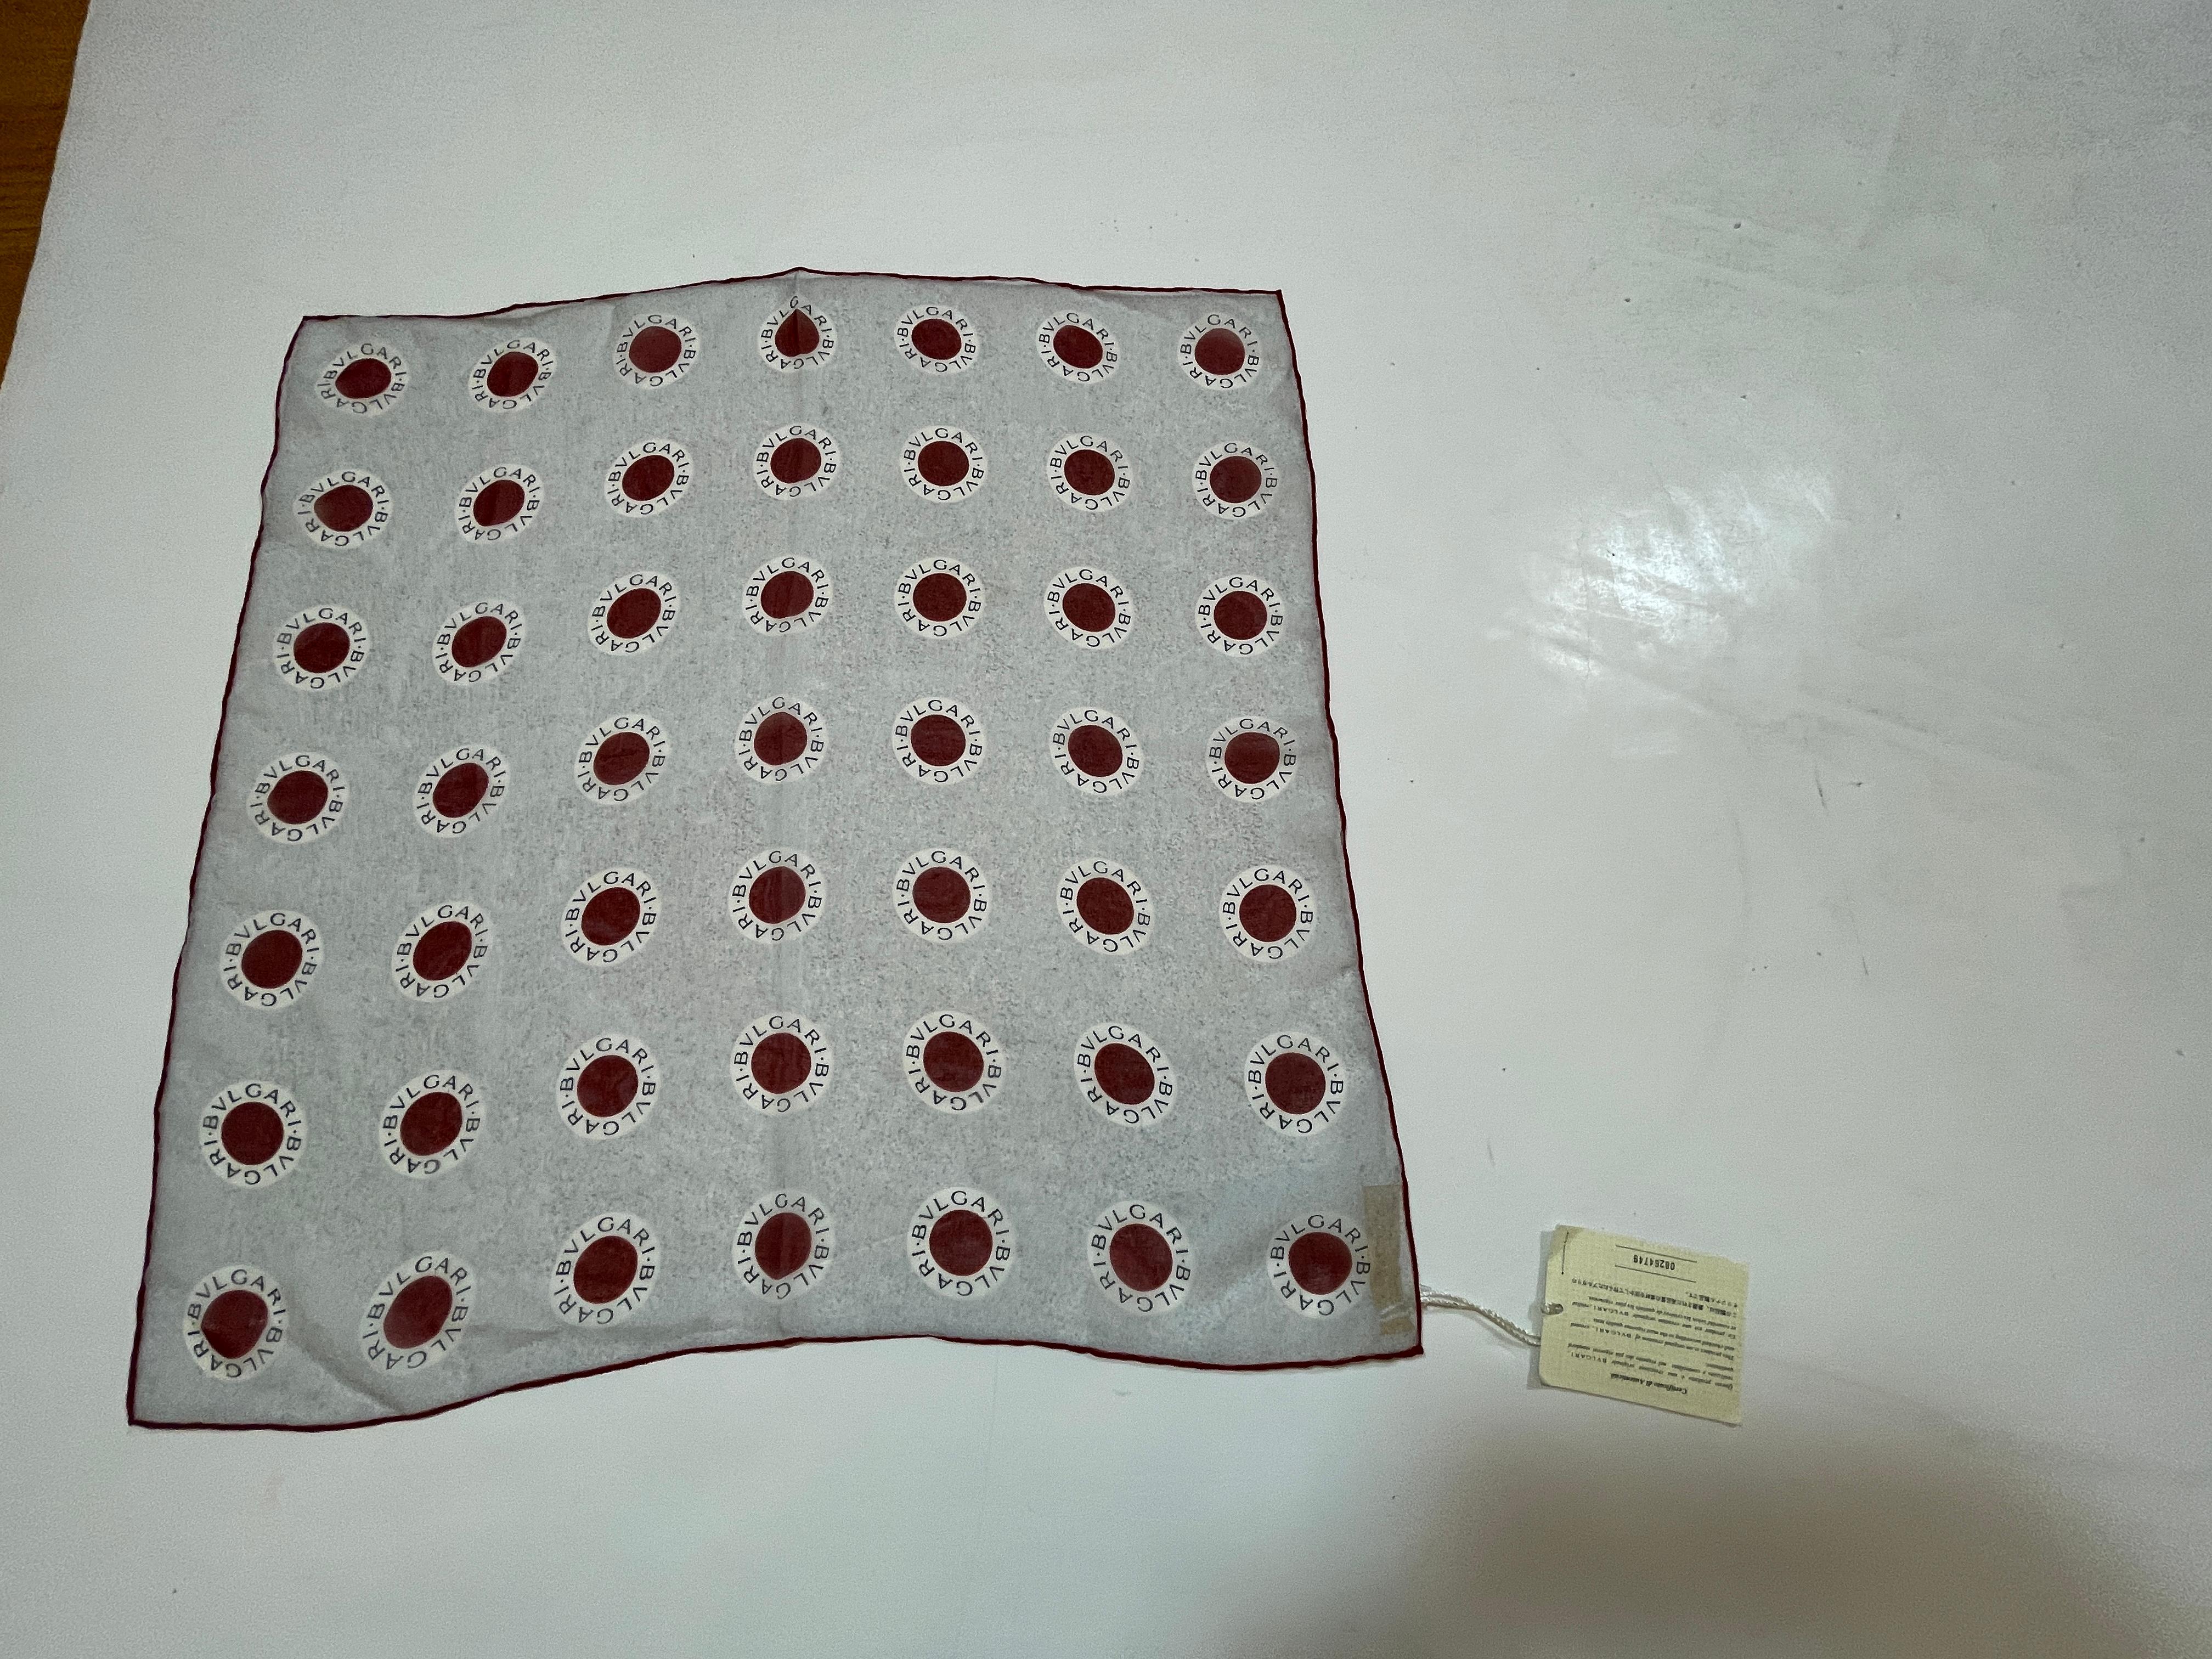 BVLGARI Red Dot Logo Silk Scarf, new with tag.
Square Bvlgari georgette silk scarf red dot logo printed motif, hand-sewn rolled edges. 
This scarf is in pristine condition new with original tag and certificate of authenticity.
Designer: